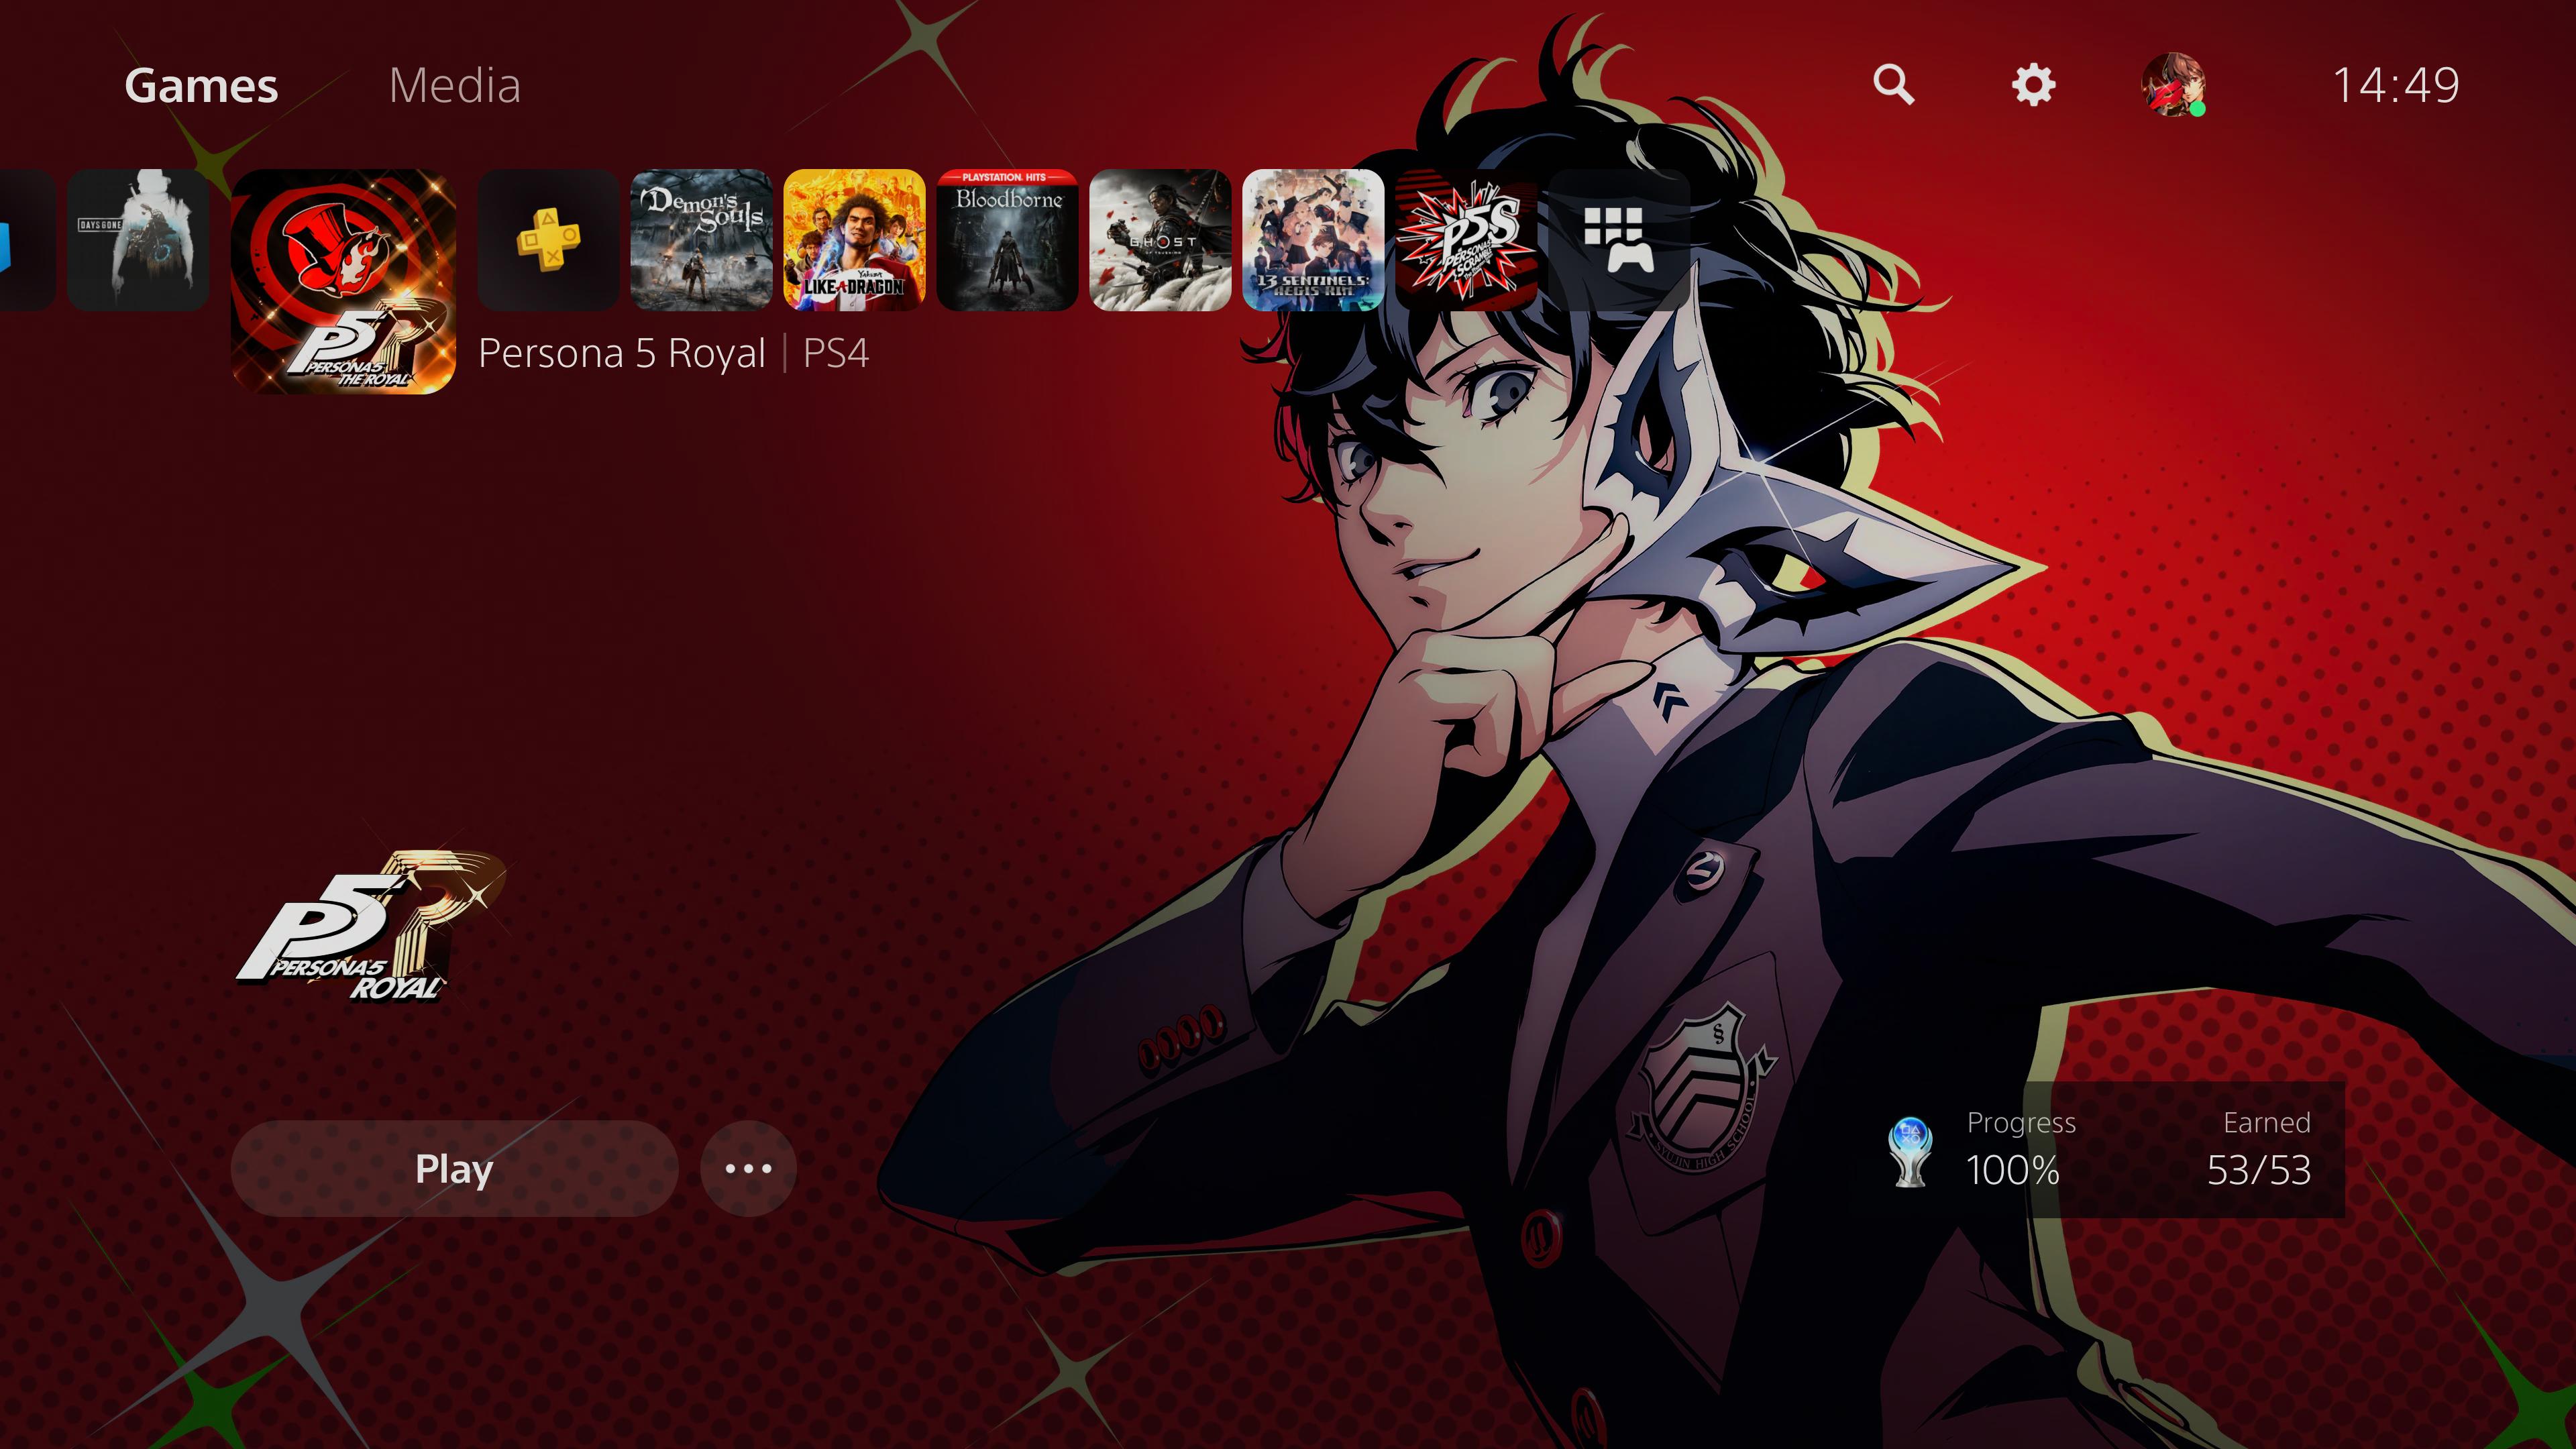 Holde Cornwall Tigge Faz ar Twitter: "The Persona 5 Royal theme on the PS5 is beautiful#PS5Share  https://t.co/IZIyduHMIN" / Twitter